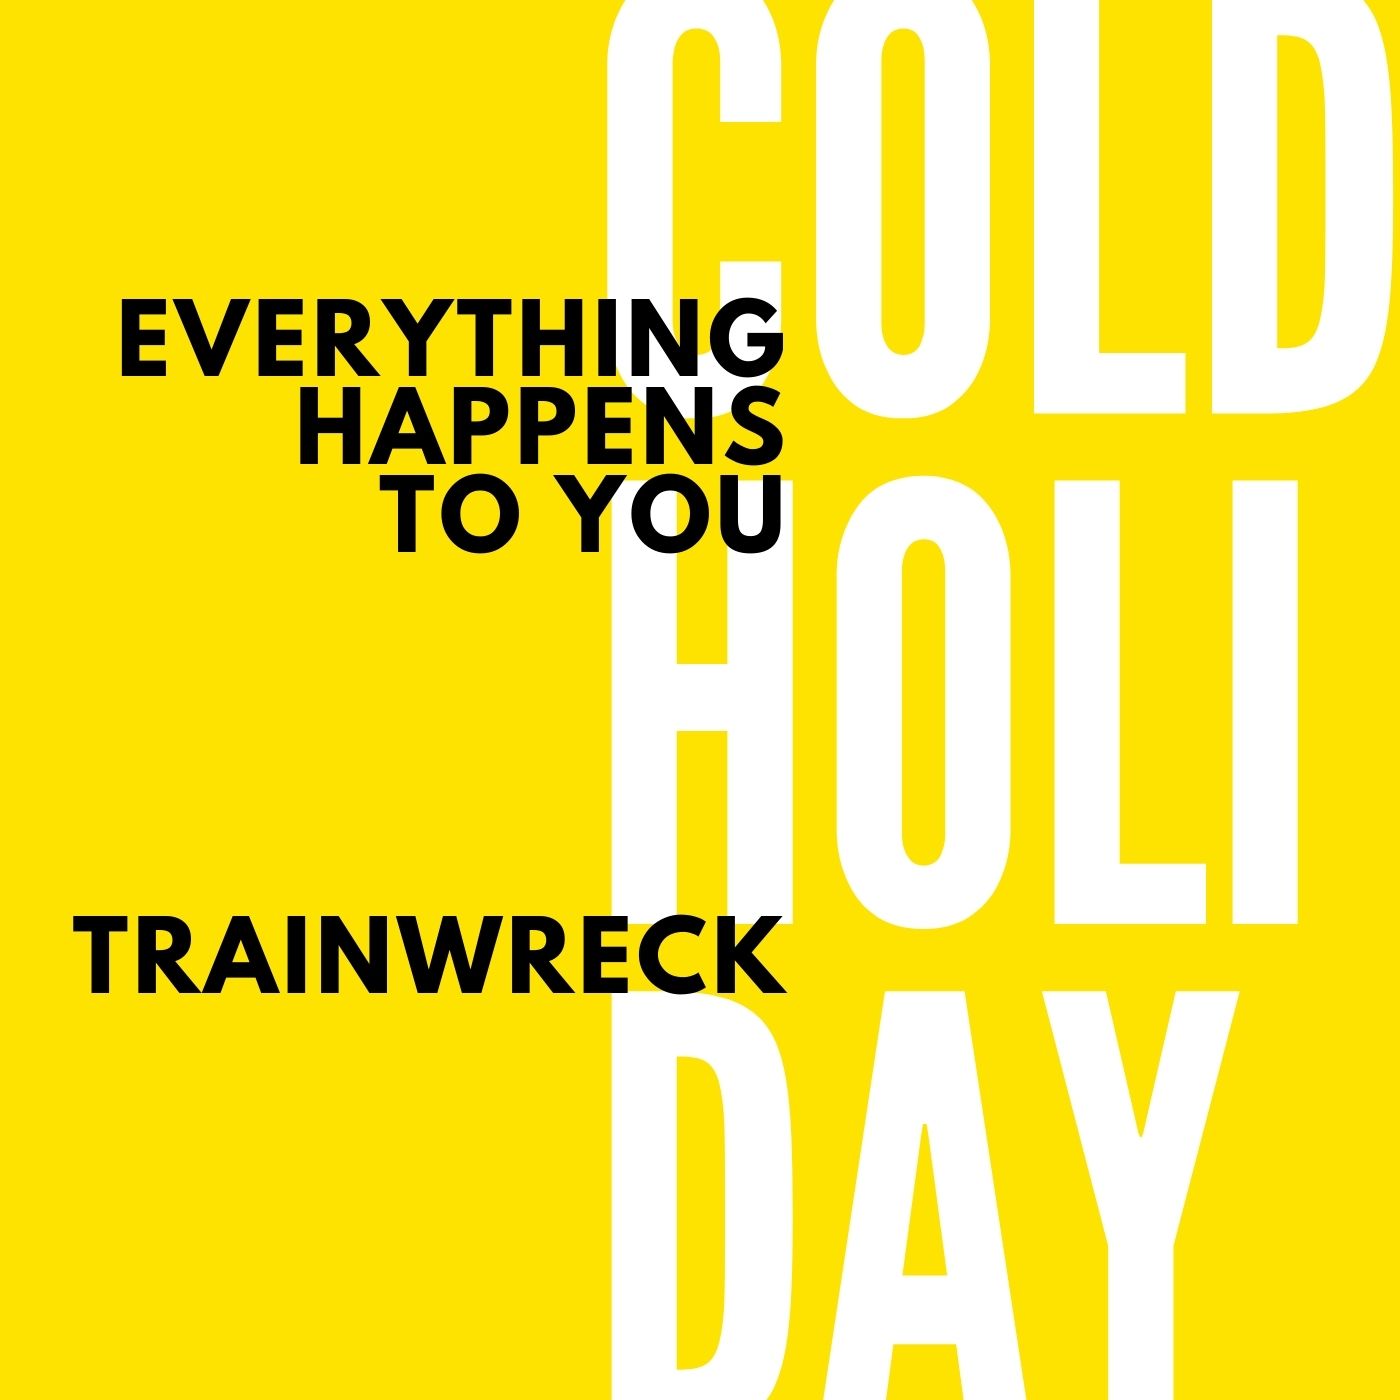 Cover for the "Everything Happens To You" single: yellow background, white text reading "COLD HOLIDAY" and in black text the words "Everything Happens To You" and "Trainwreck"